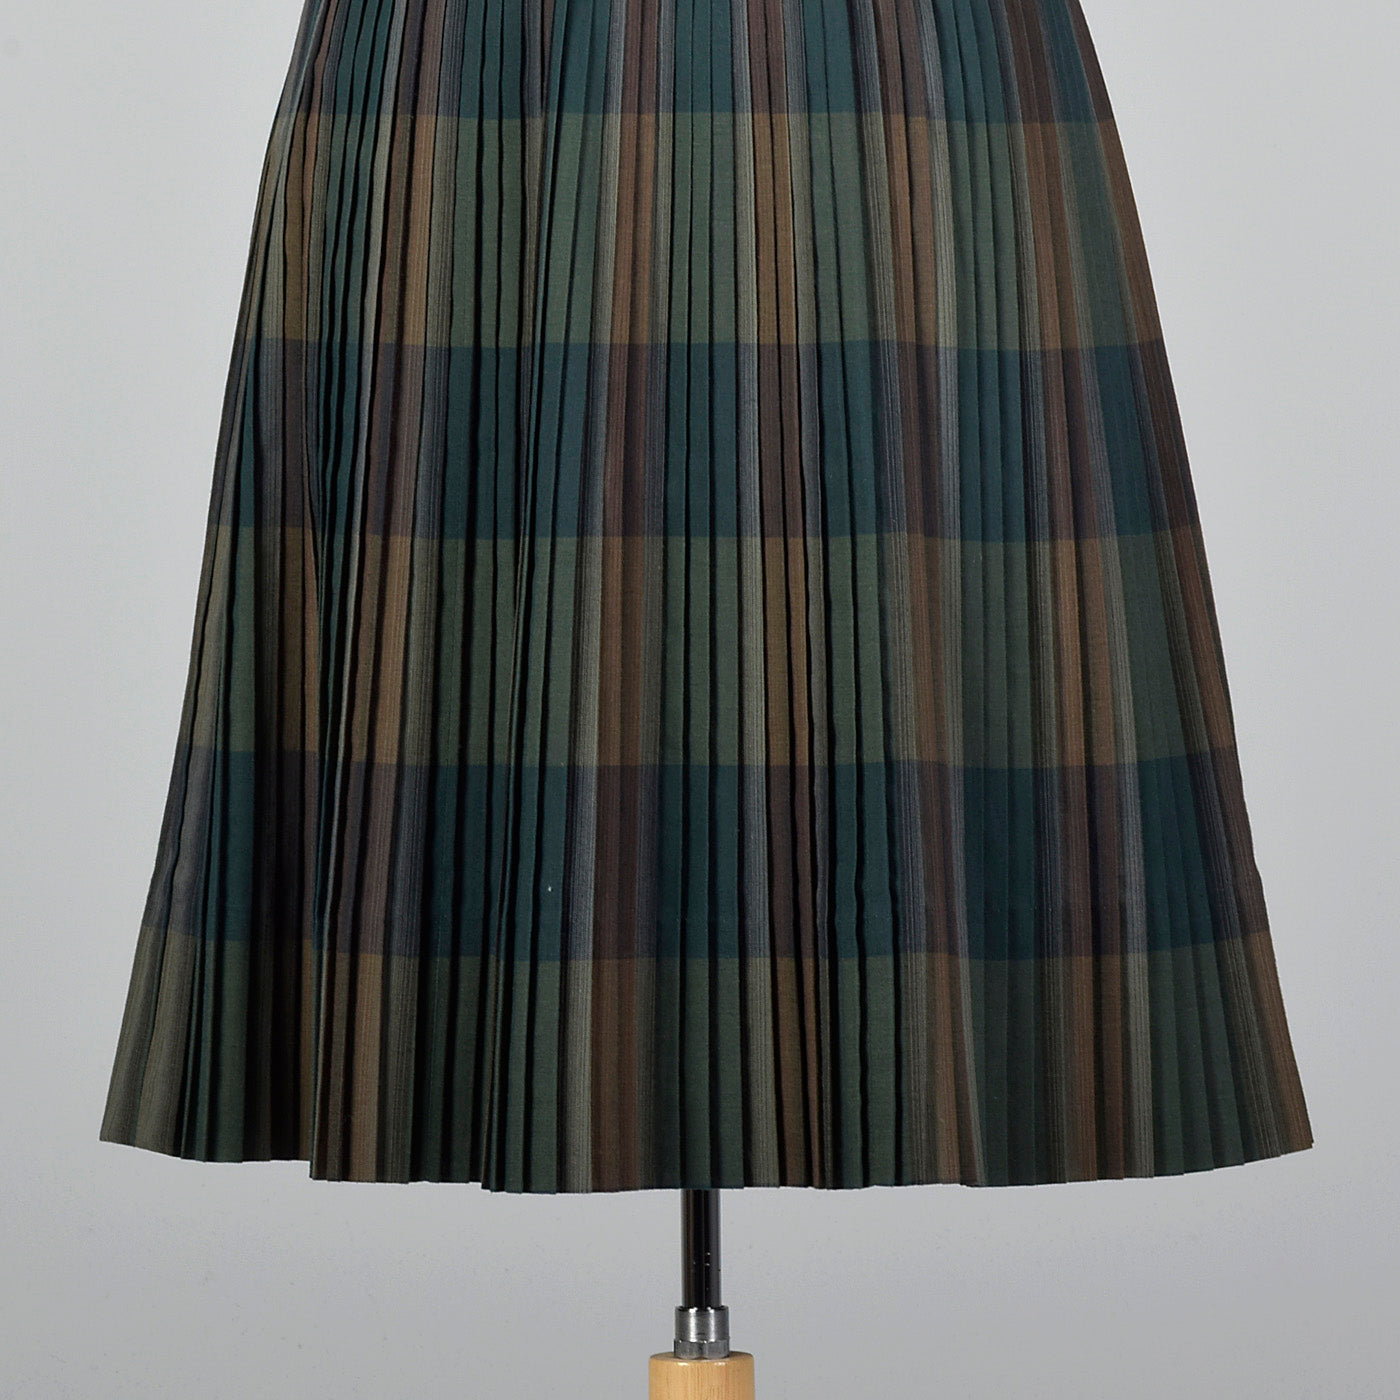 1950s Summer Dress in Green Plaid